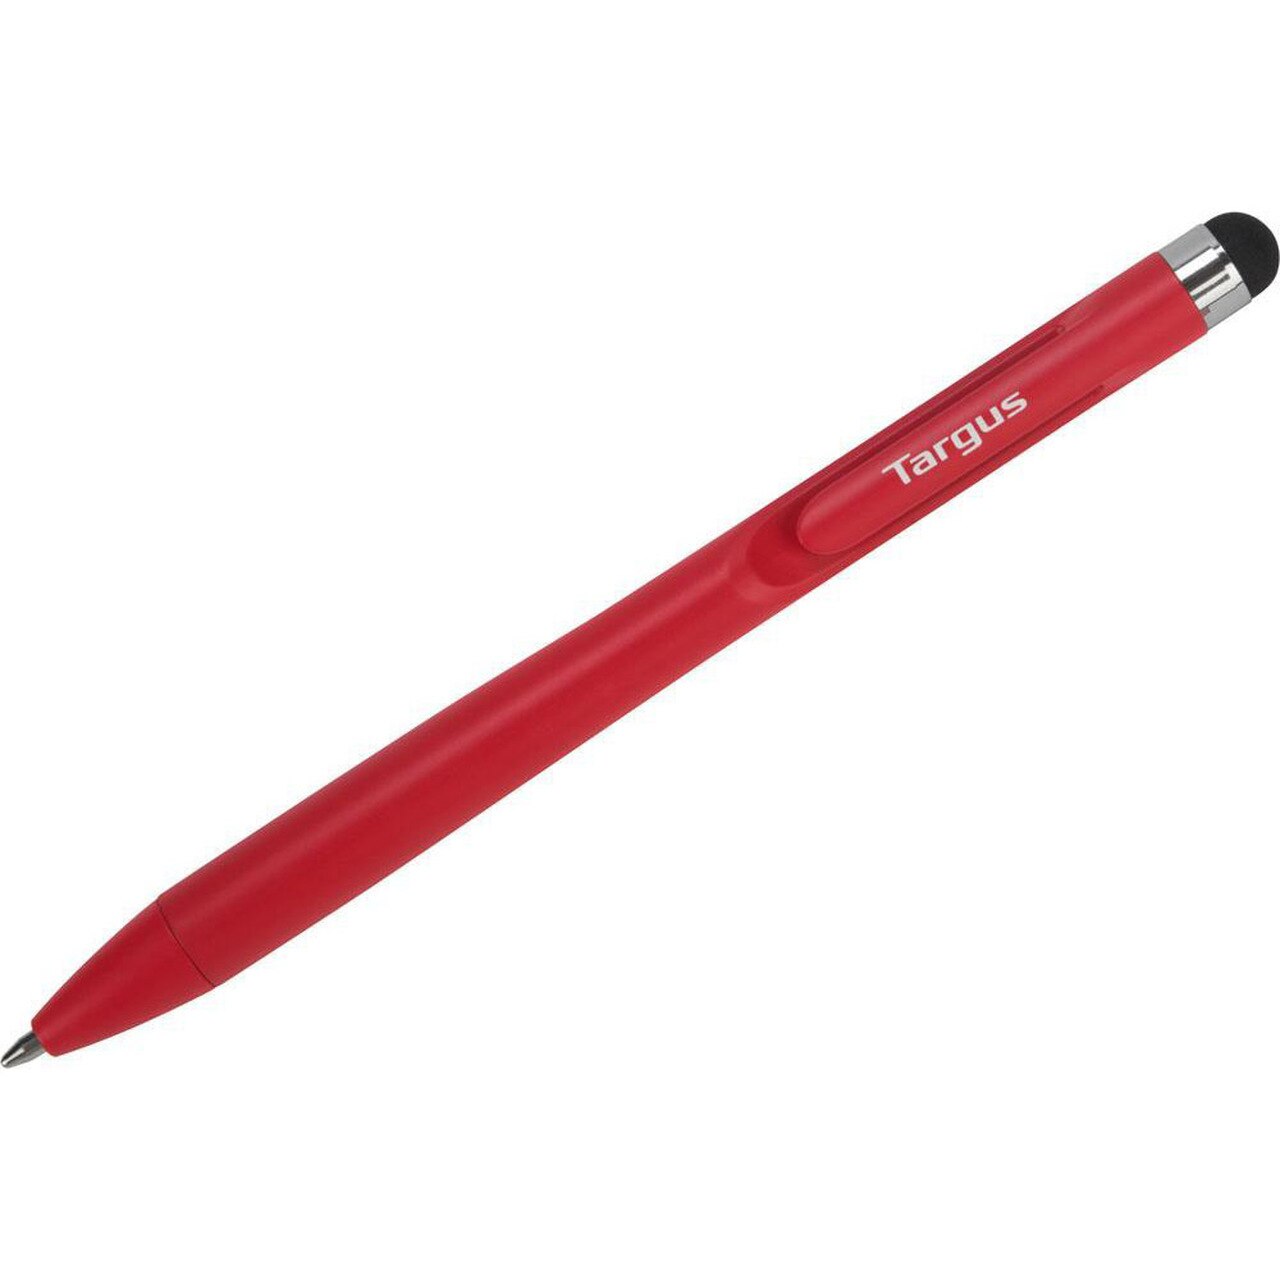 buy Targus Smooth Glide Stylus Pen with Rubber Tip/Compatible with All Touch Screen Surfaces, Sketch, Write on Tablet or SmartPhone - Red online from our Melbourne shop